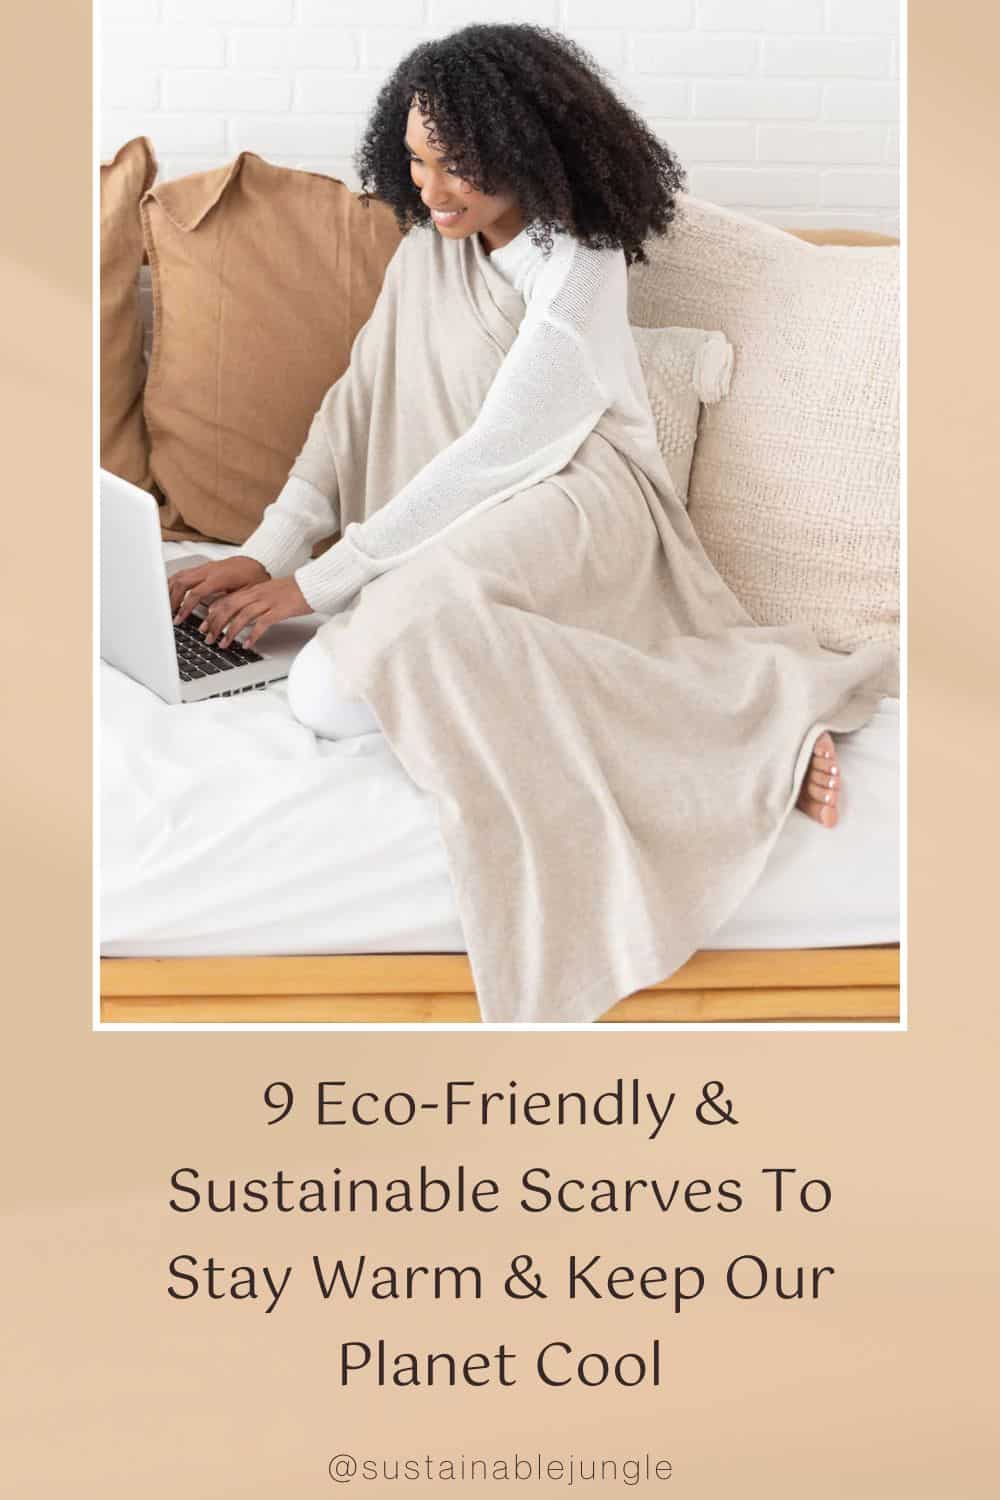 9 Eco-Friendly & Sustainable Scarves To Stay Warm & Keep Our Planet Cool Image by Zestt Organics #sustainablescarves #sustainablescarf #ecofriendlyscarves #fairtradescarves #ethicalscarves